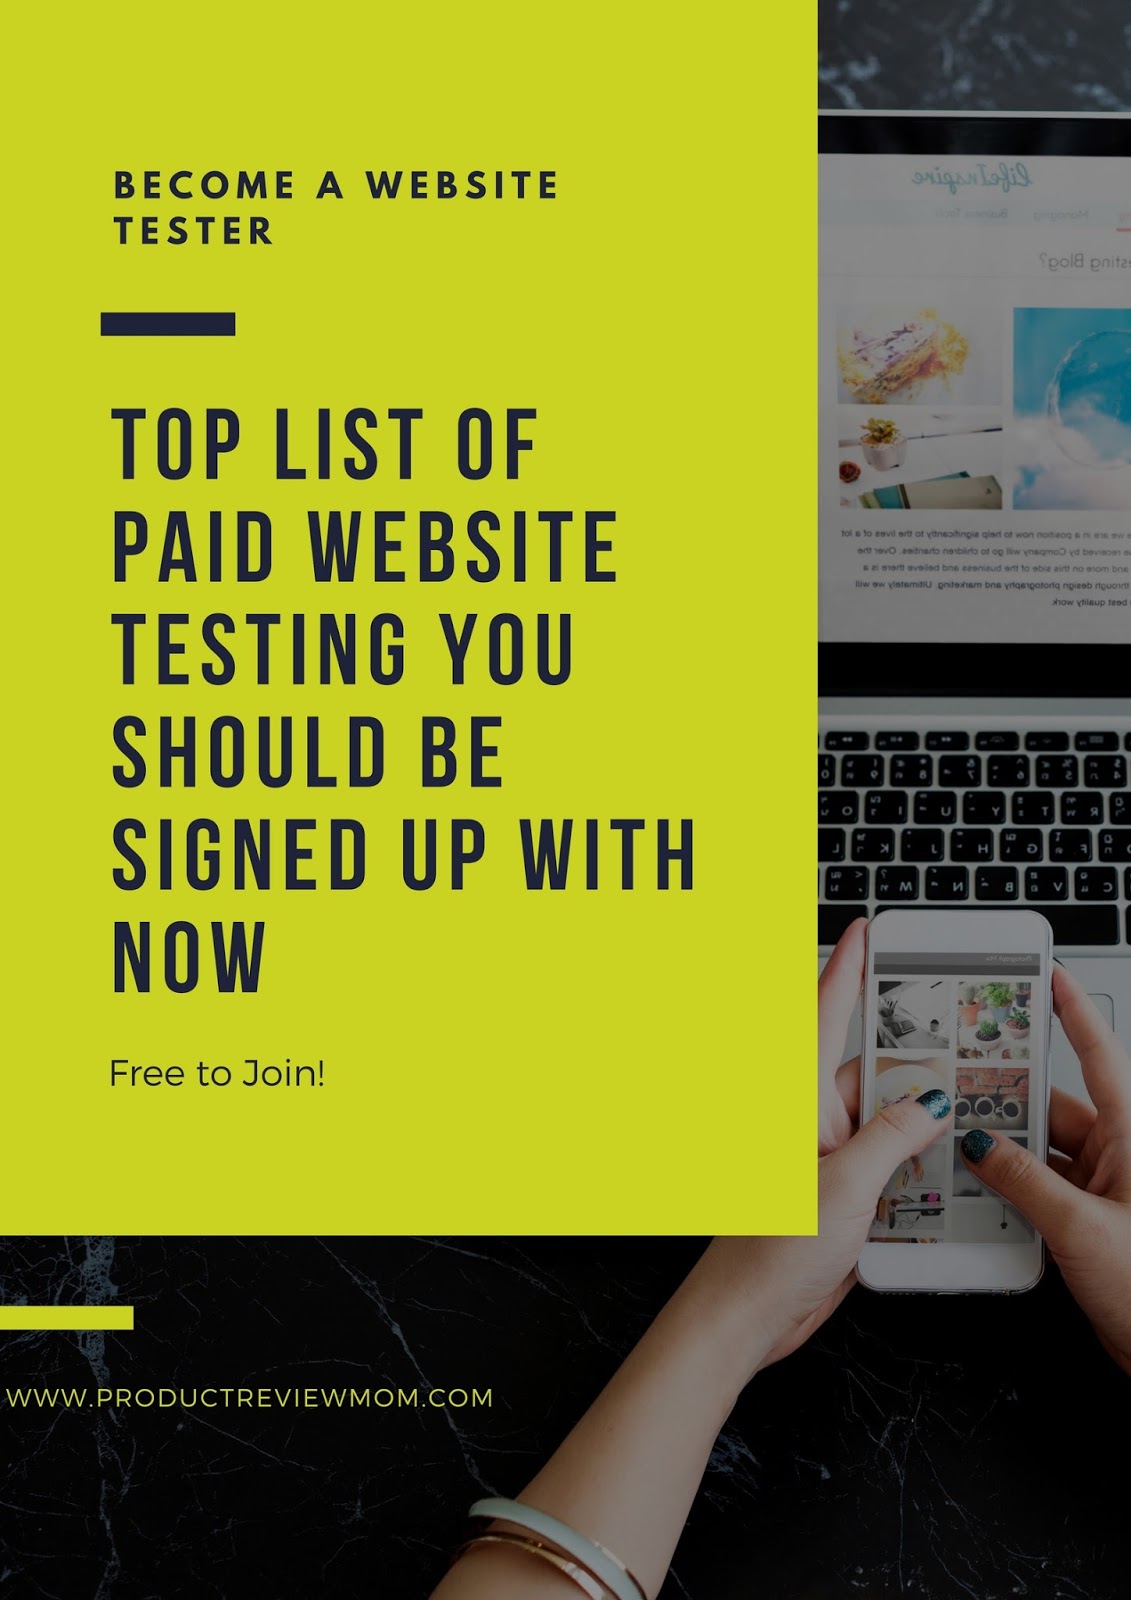 Top List of Paid Website Testing You Should Be Signed Up with Now  via  www.productreviewmom.com